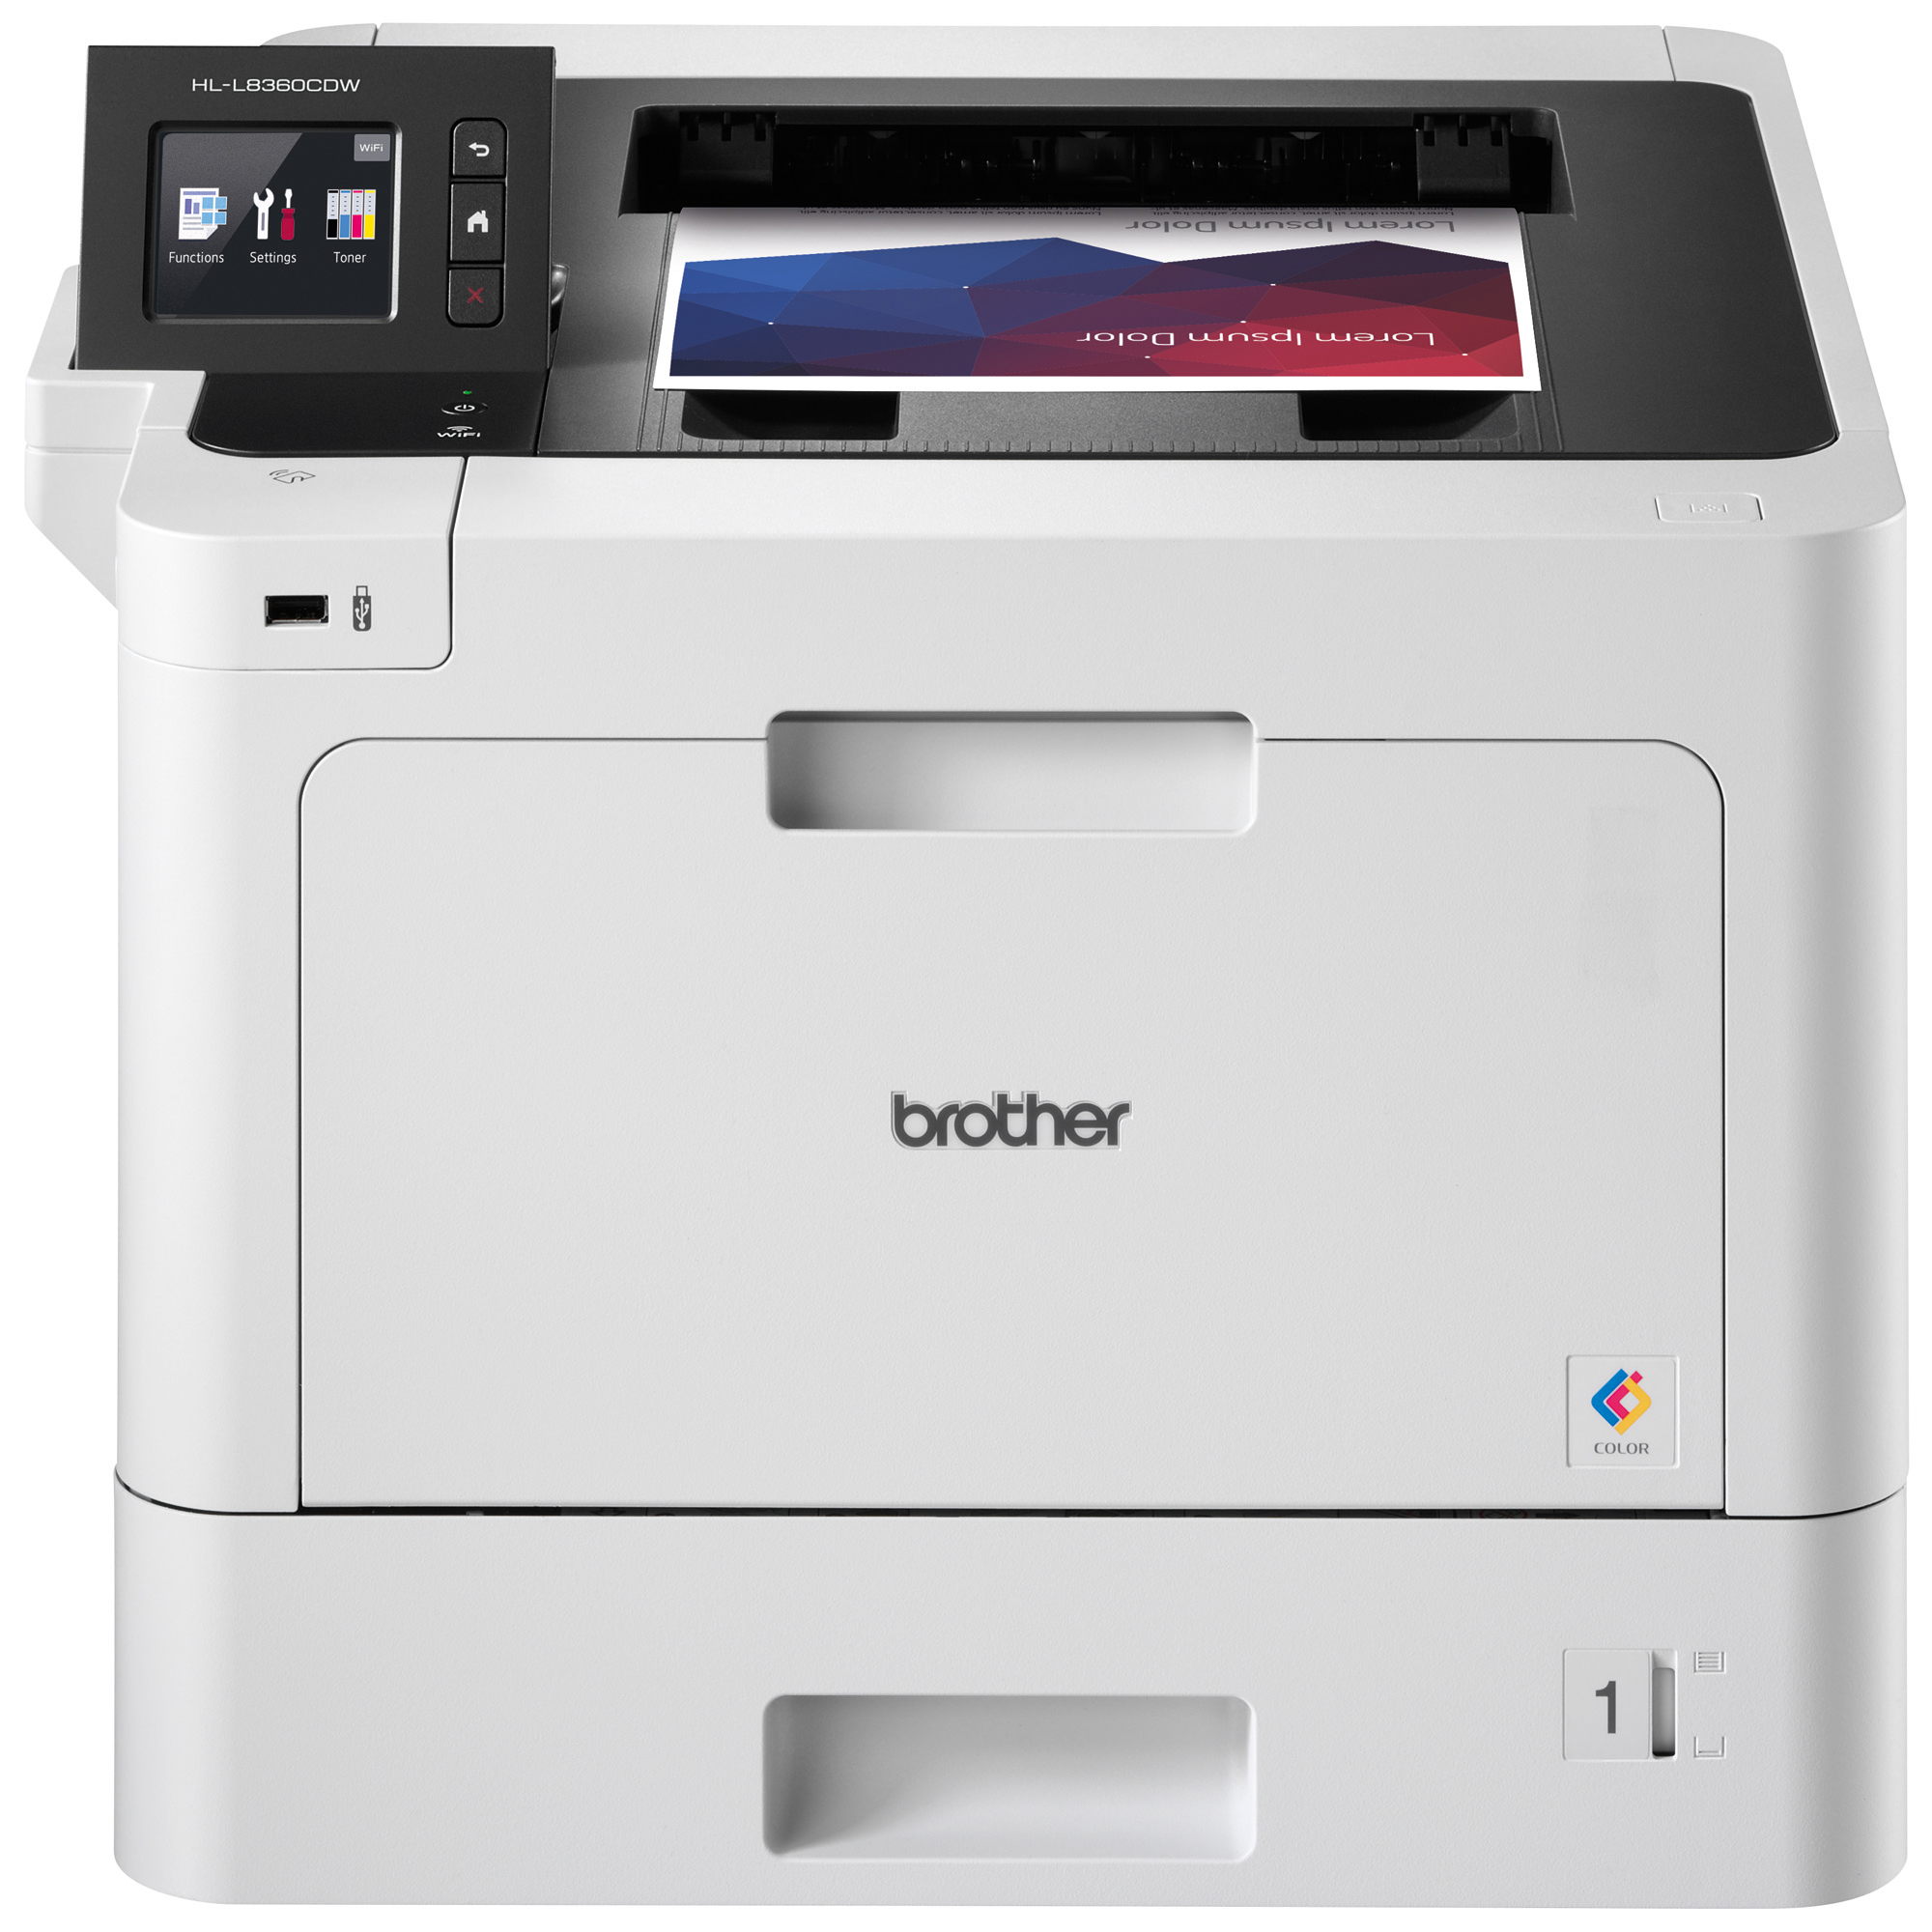 Brother Business Color Laser Printer, HL-L8360CDW, Wireless Networking, Automatic Duplex Printing, Mobile Printing, Cloud printing - image 1 of 10